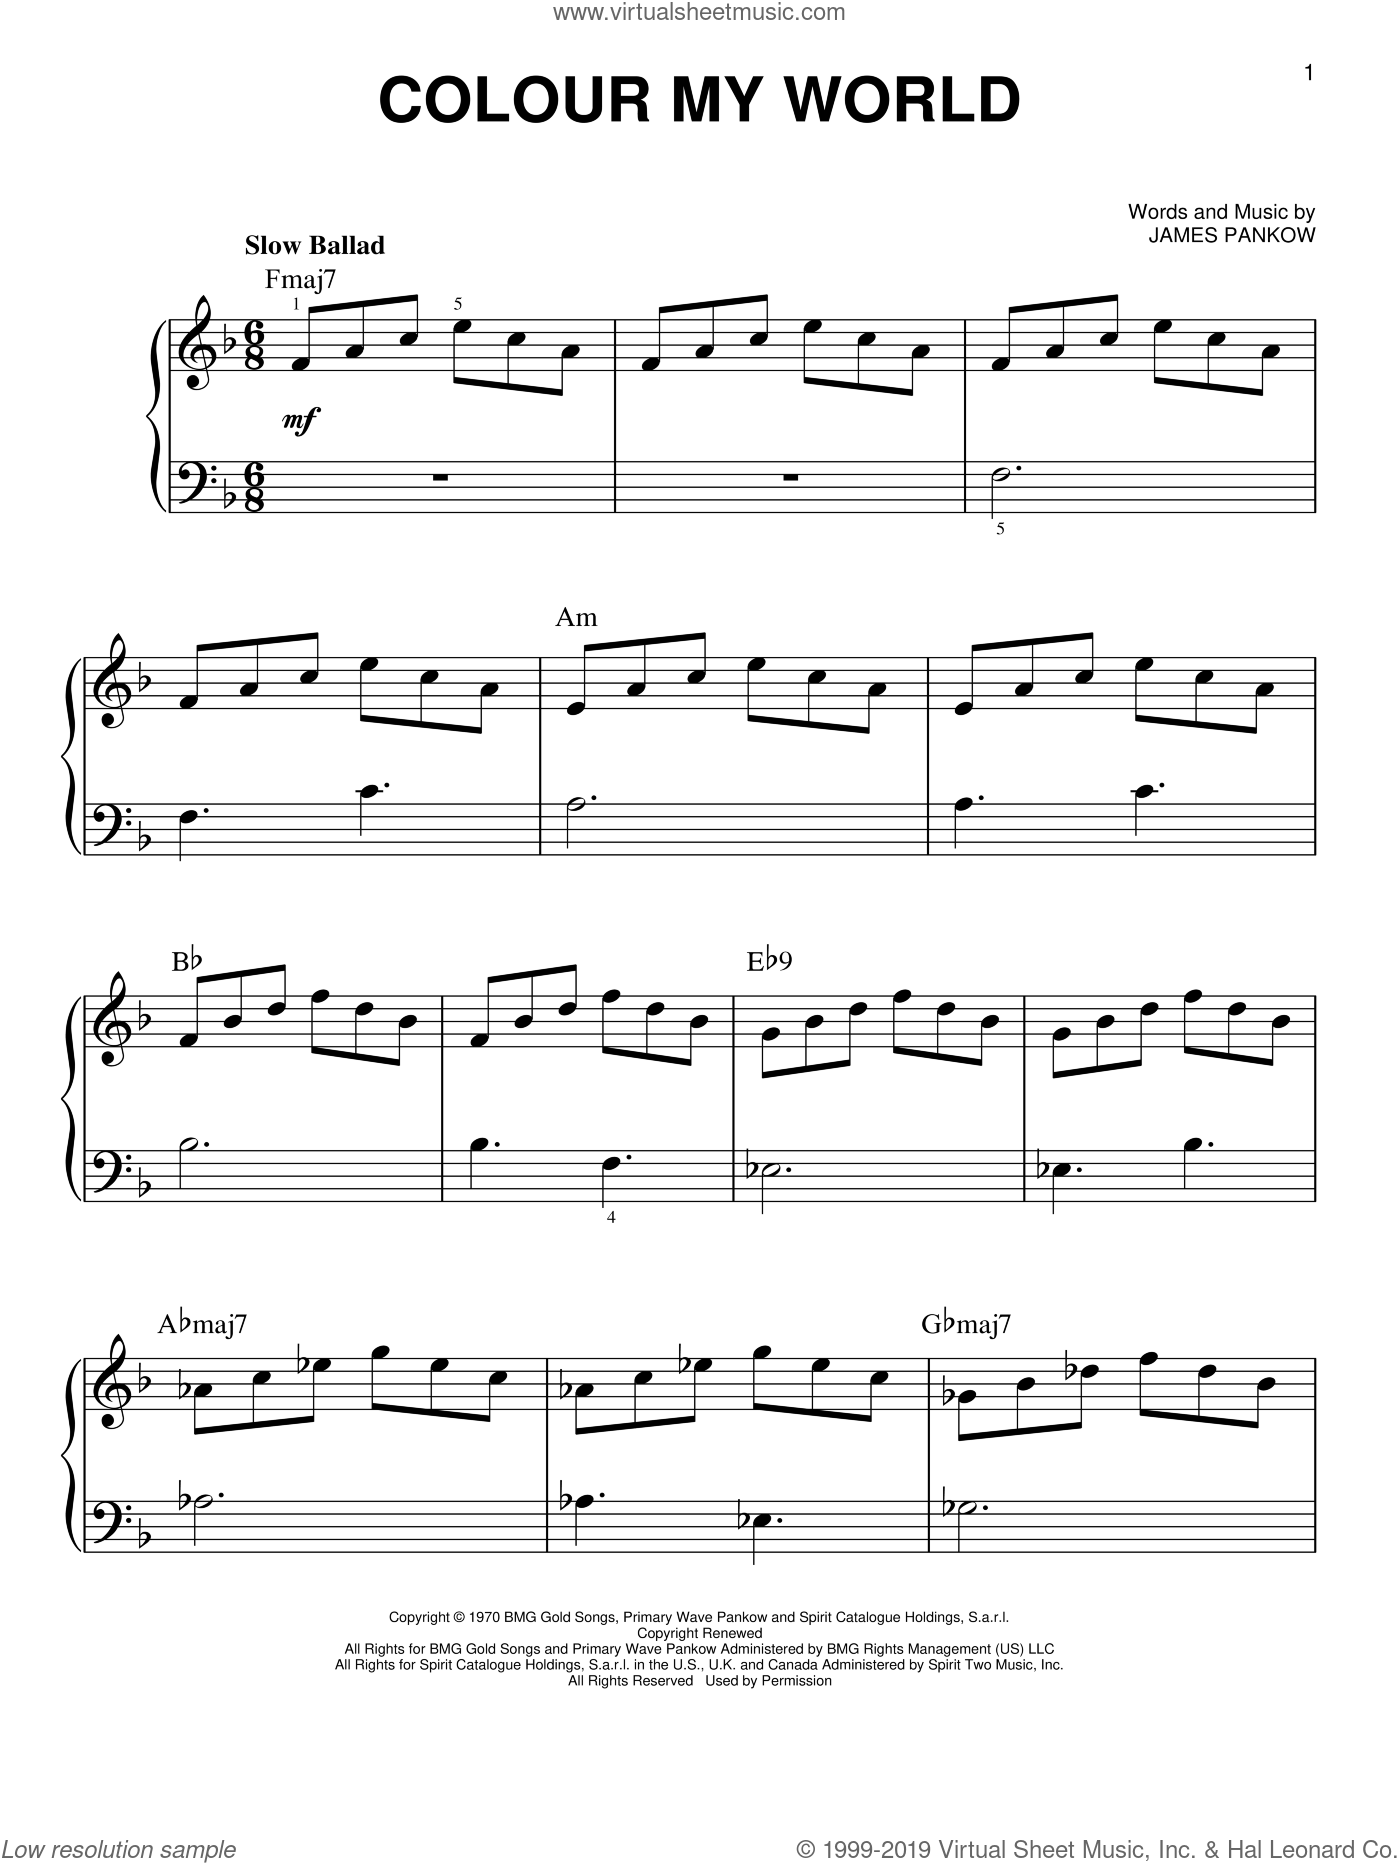 Chicago - Colour My World sheet music for piano solo (PDF)